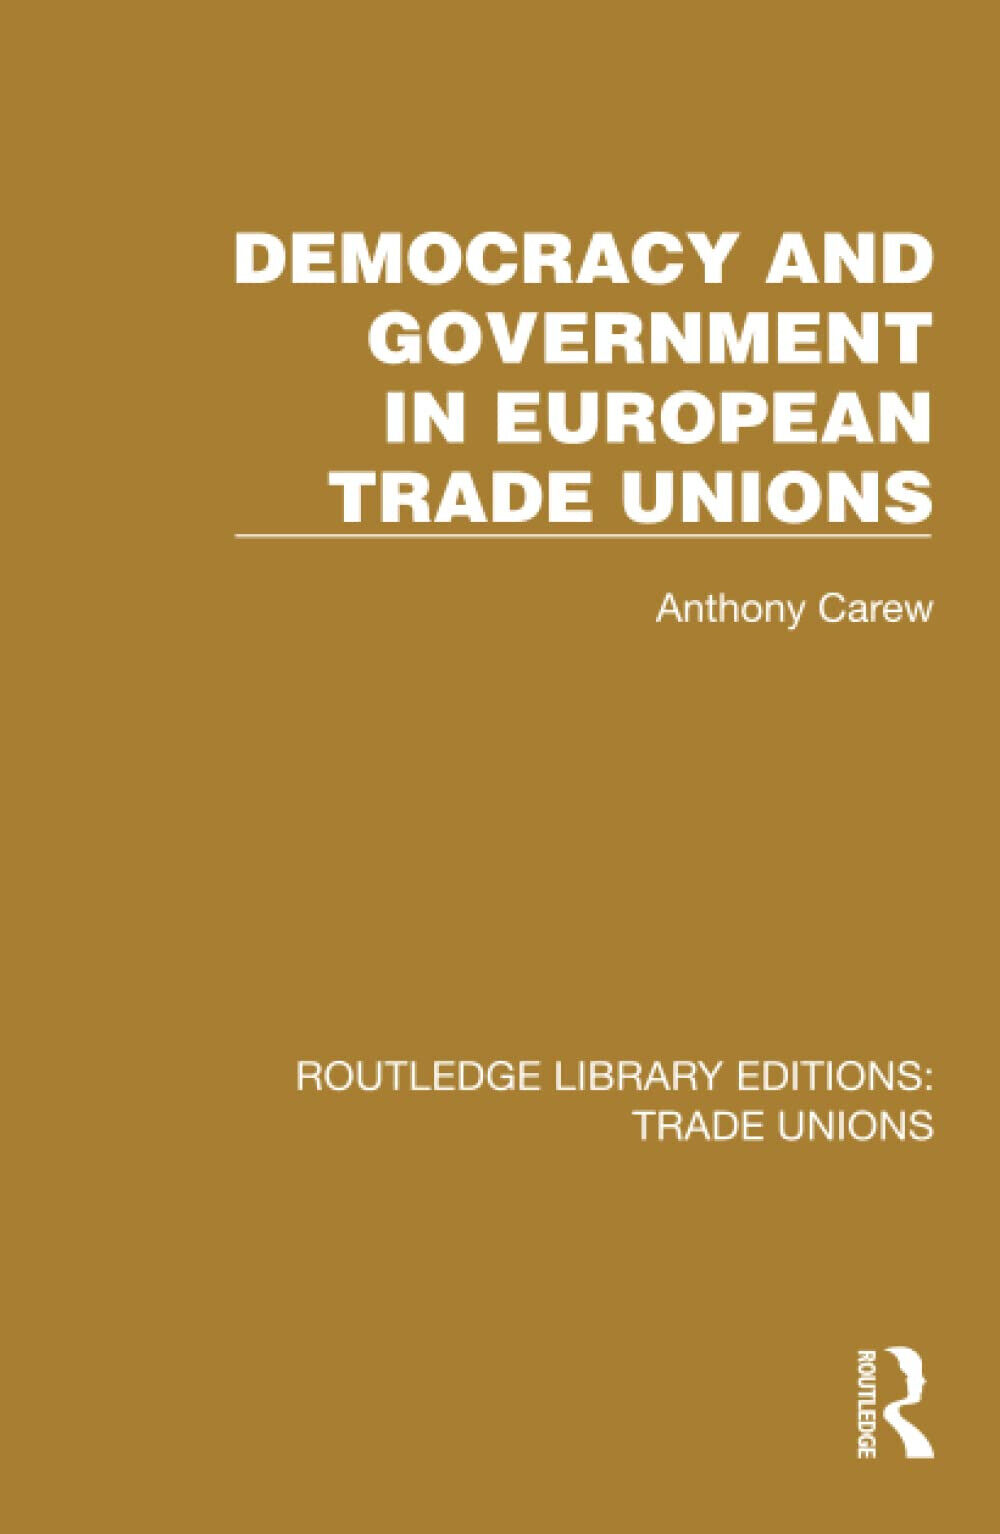 Democracy And Government In European Trade Unions - Anthony Carew - 2022